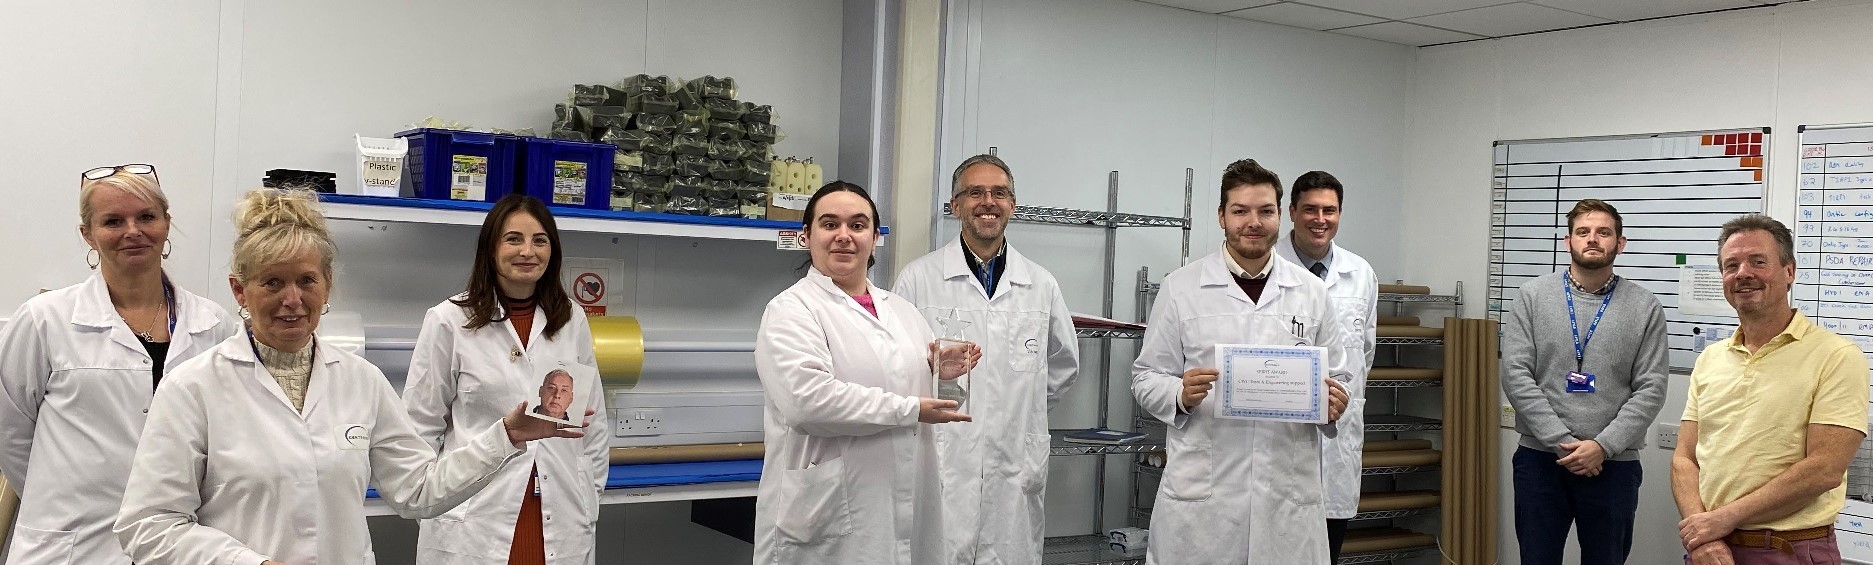 The SPIRIT Award for May 2020 goes to the the Coil Wound Components team and Engineering support